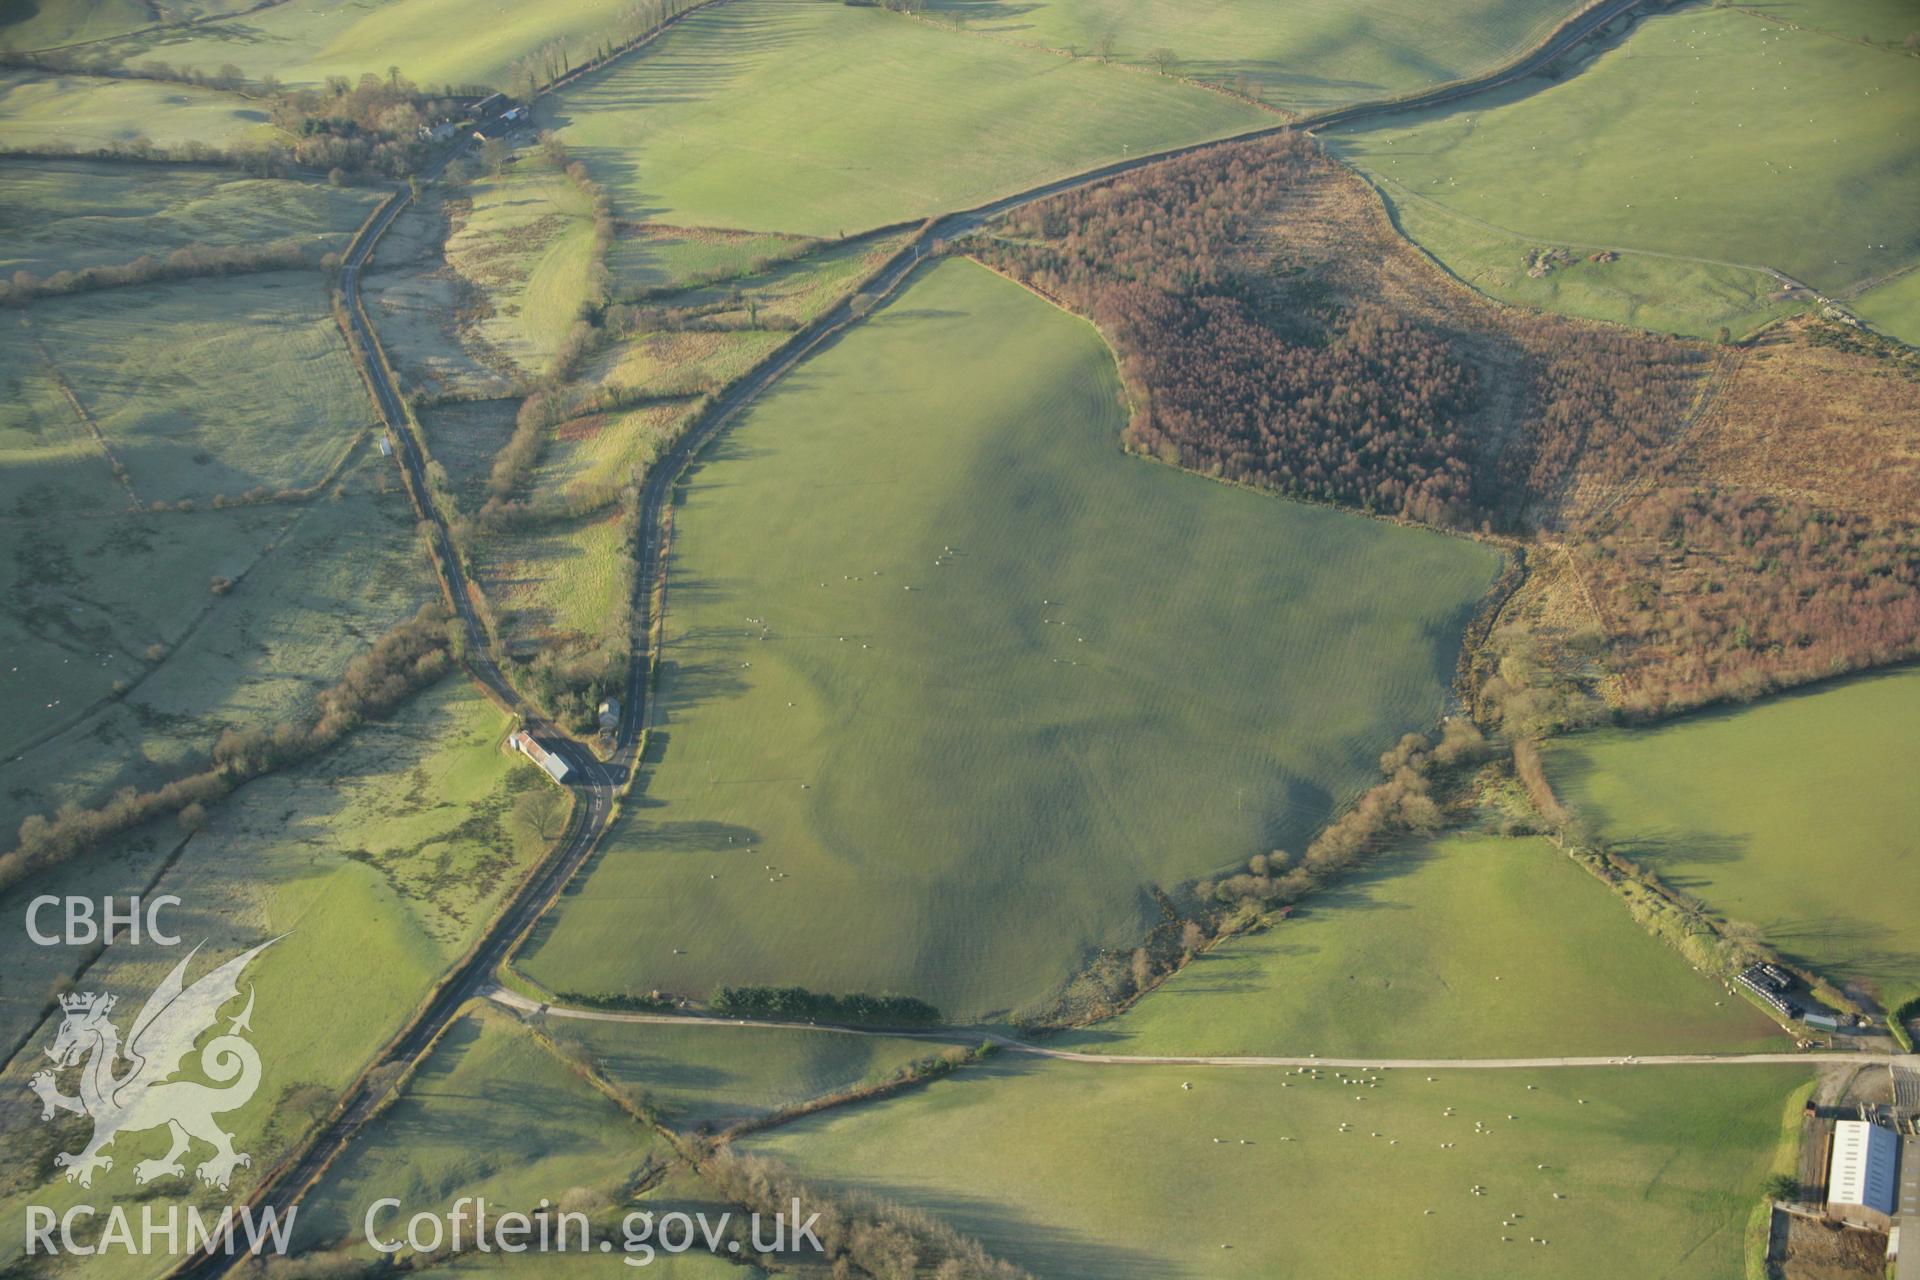 RCAHMW colour oblique aerial photograph of showing landscape view near River Vrynwy (Afon Ffyrnwy). Taken on 25 January 2007 by Toby Driver